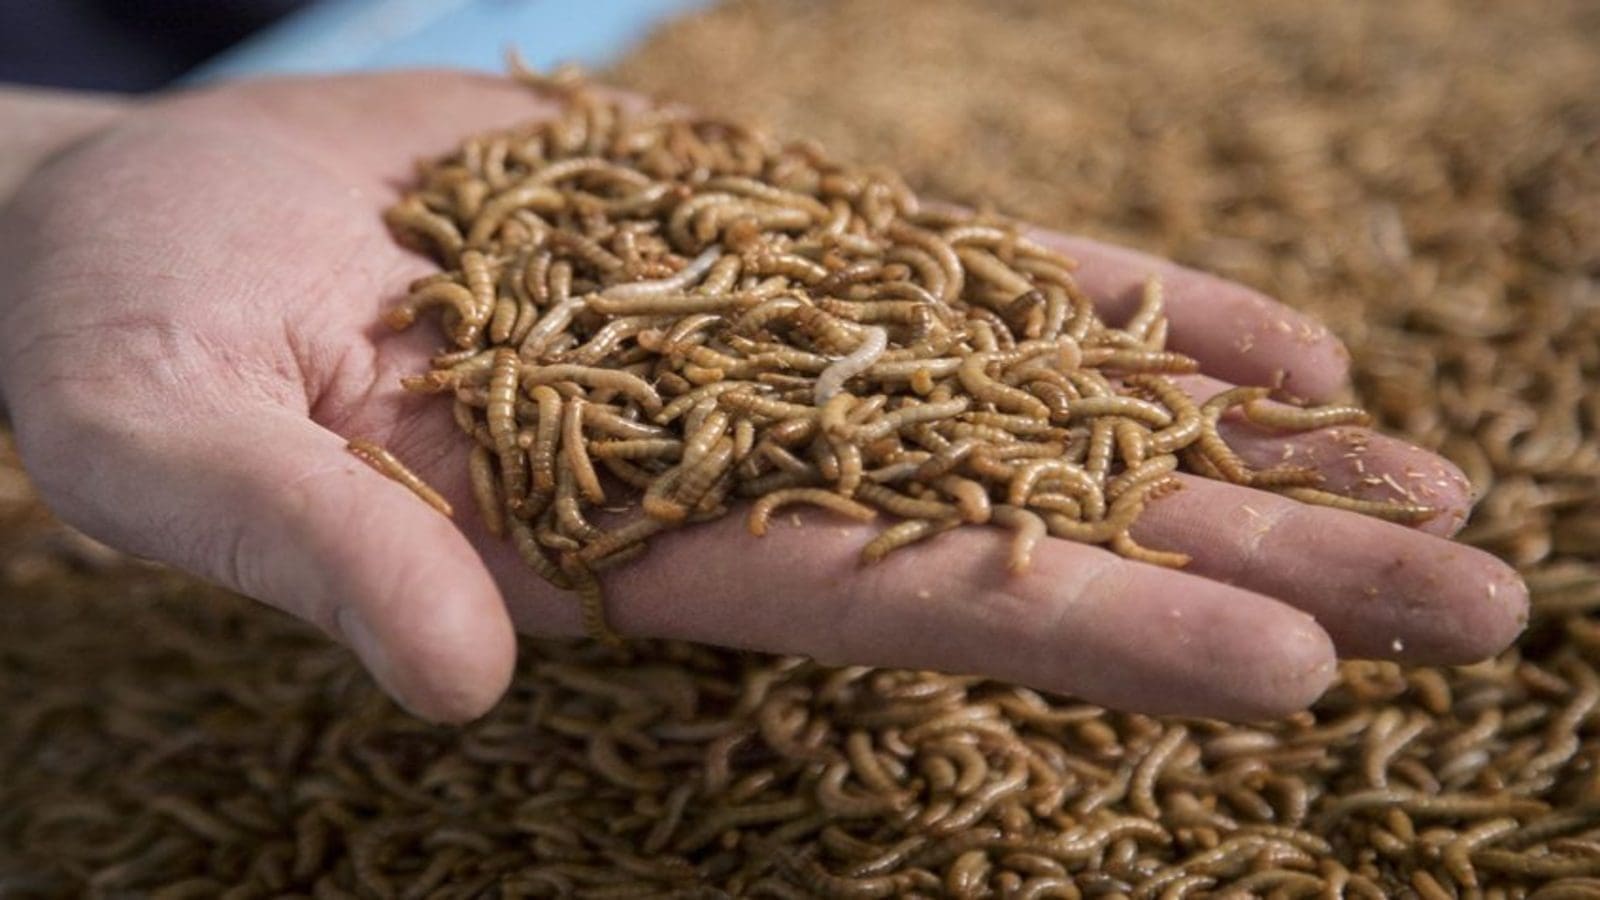 South Africa based insect protein processor Inseco raises US$5.3m in seed funding round